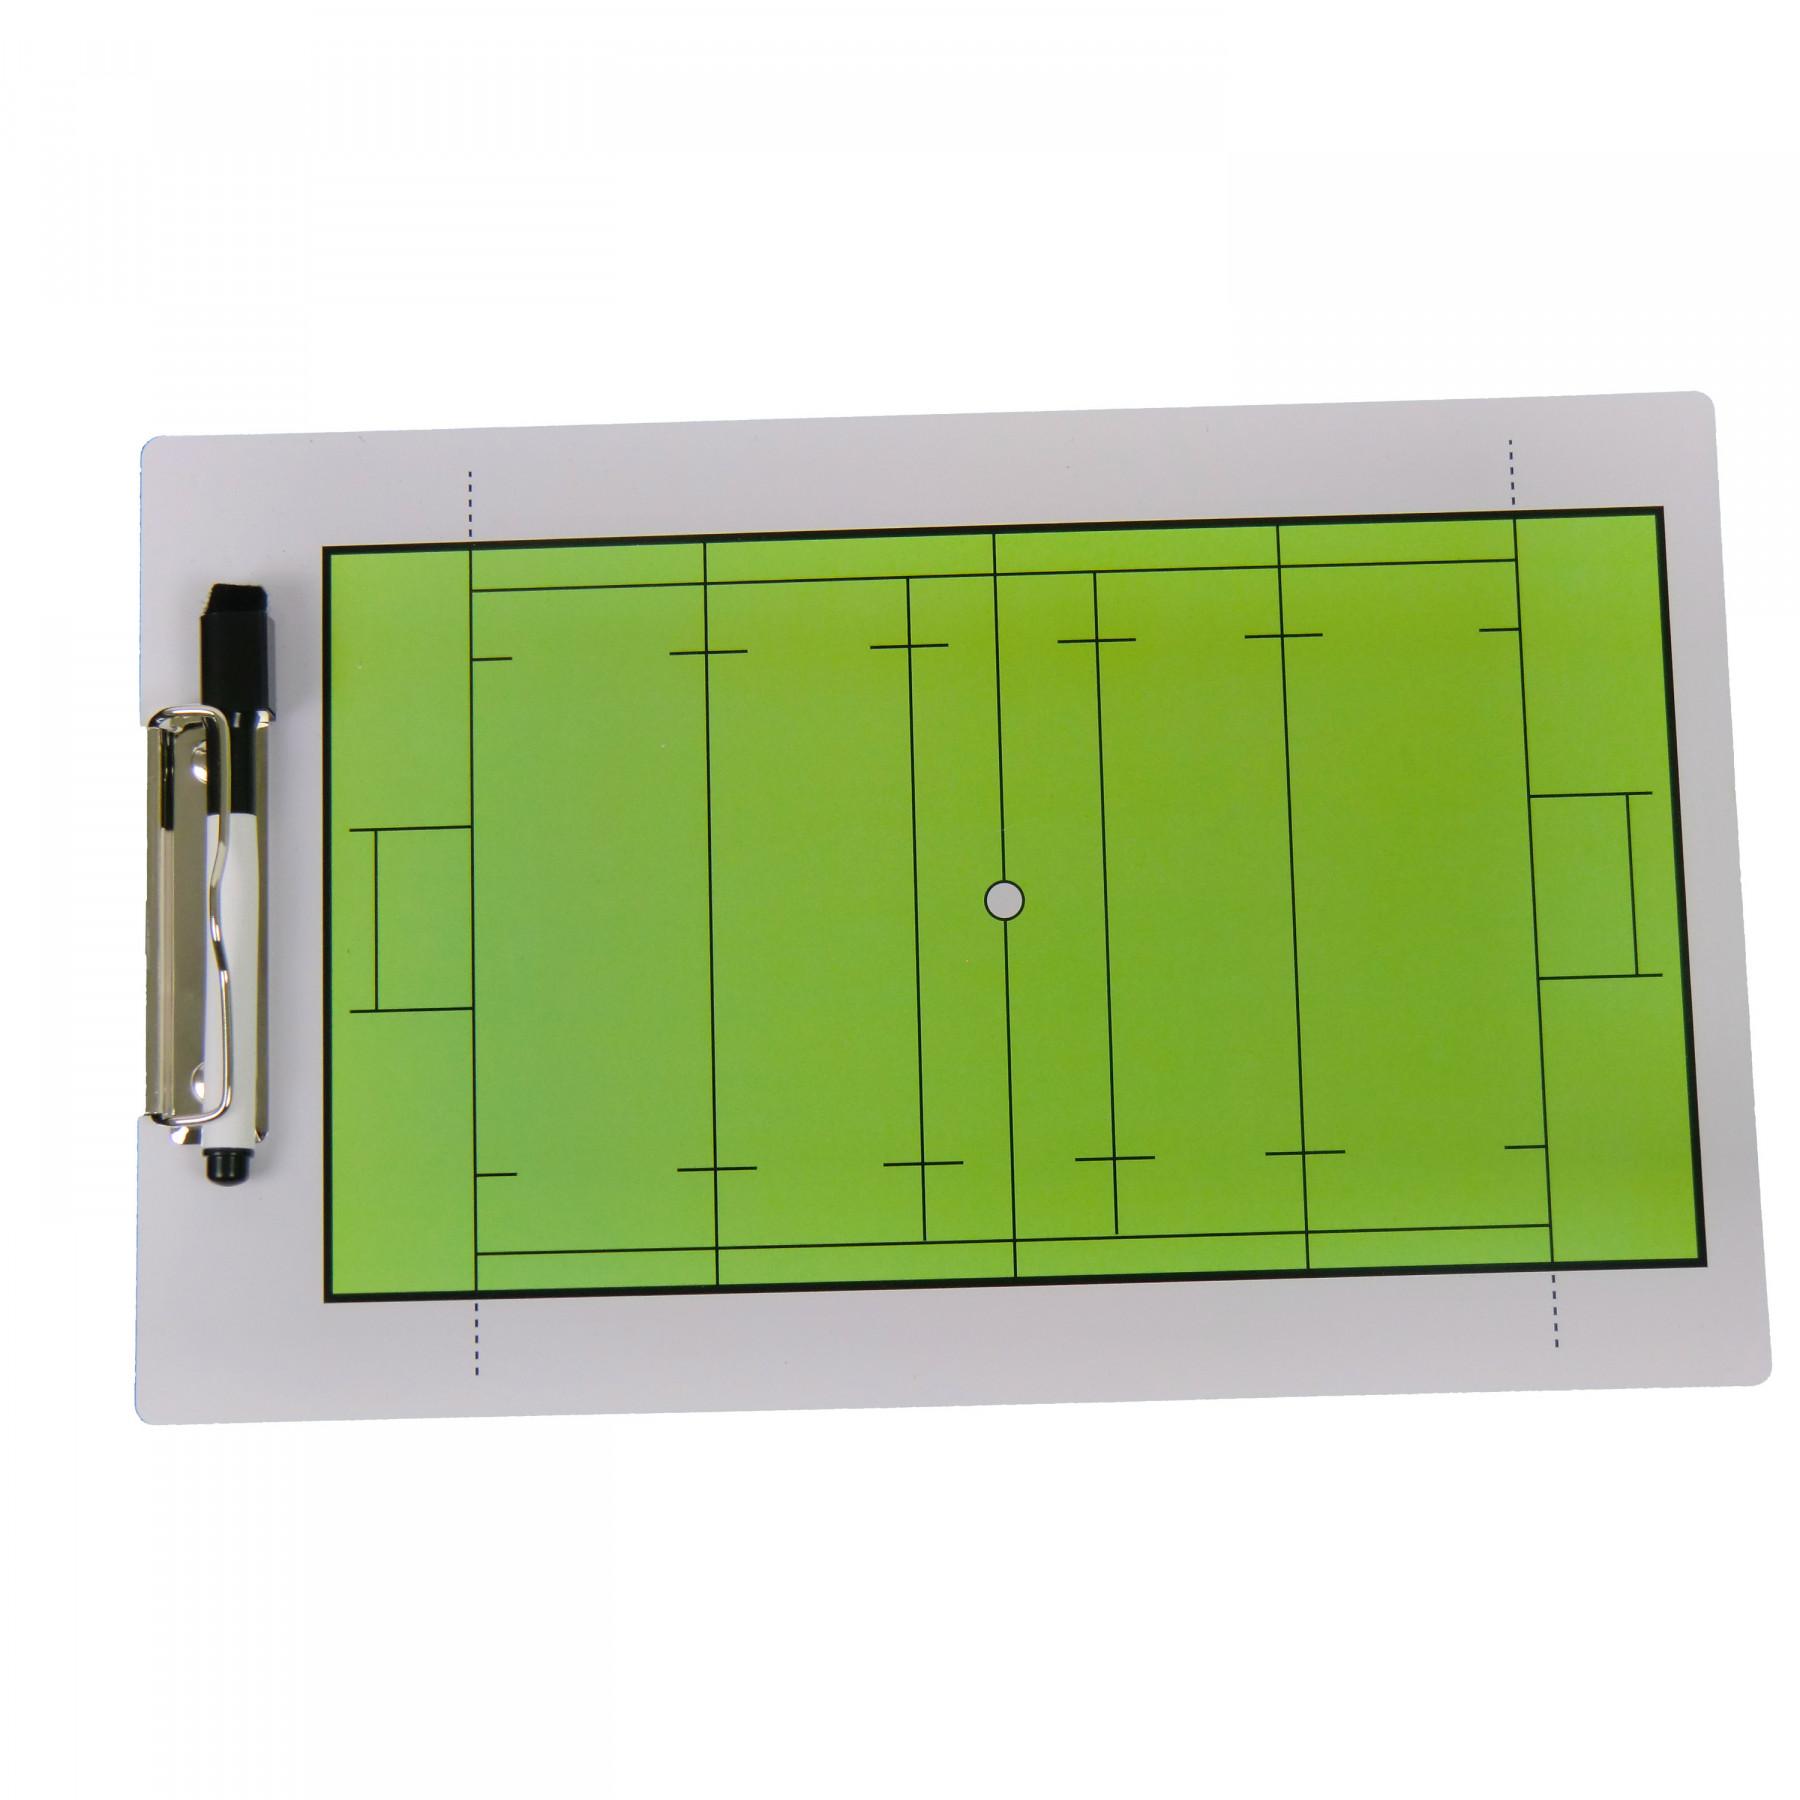 Two-sided rugby tactical notebook Sporti France